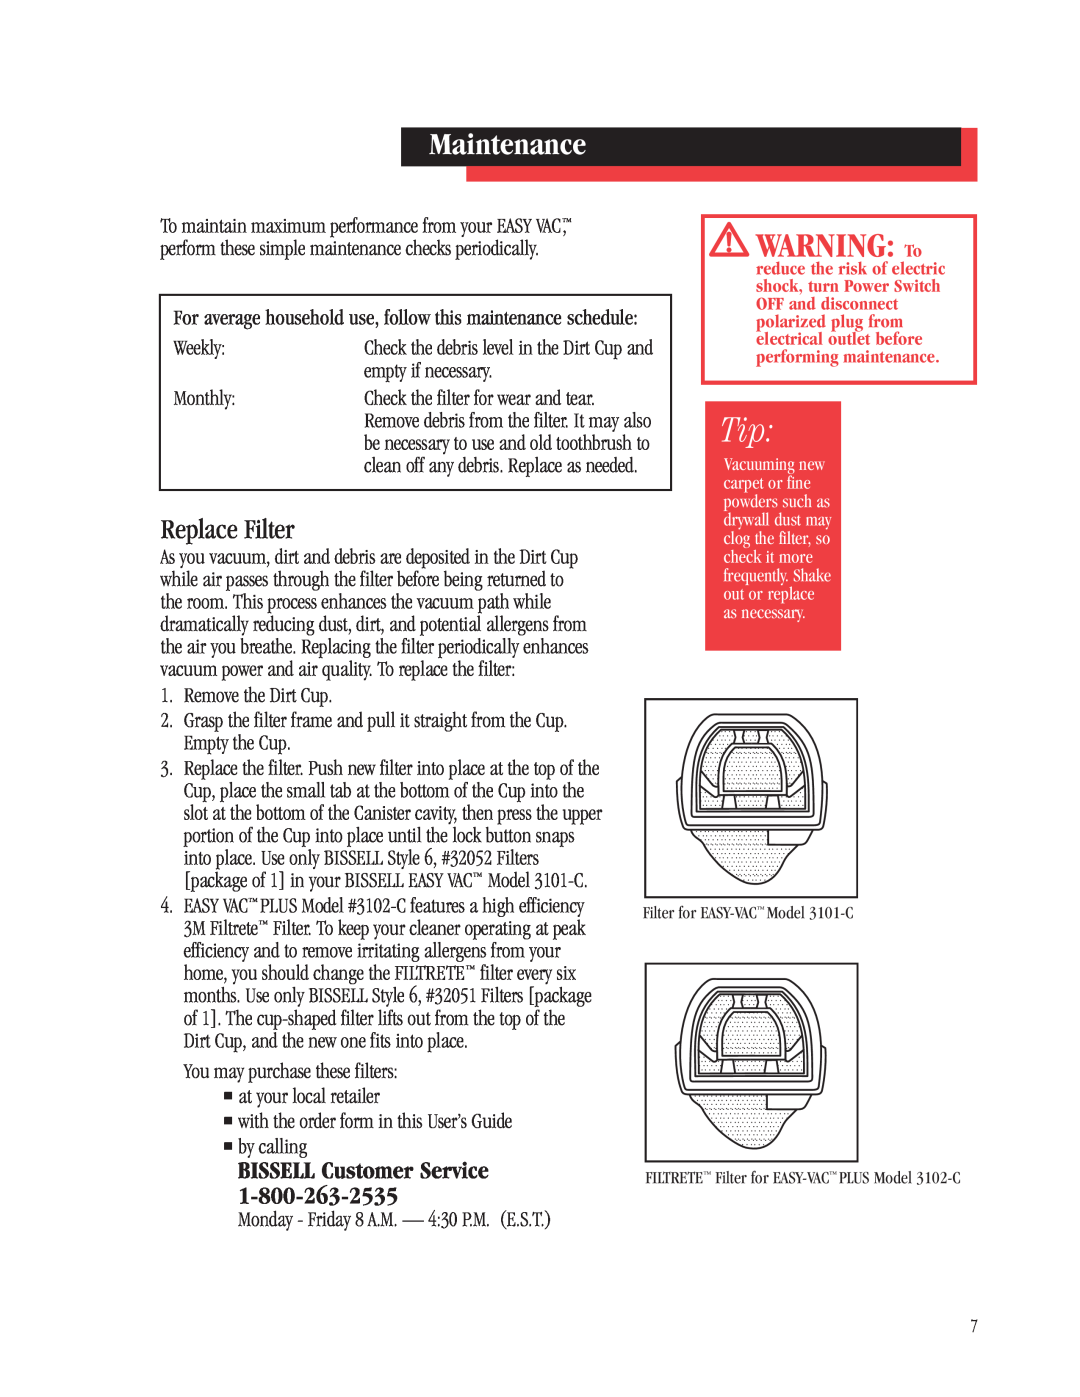 Bissell 3101, 3102 warranty Maintenance, Replace Filter, BISSELL Customer Service, WARNING To 